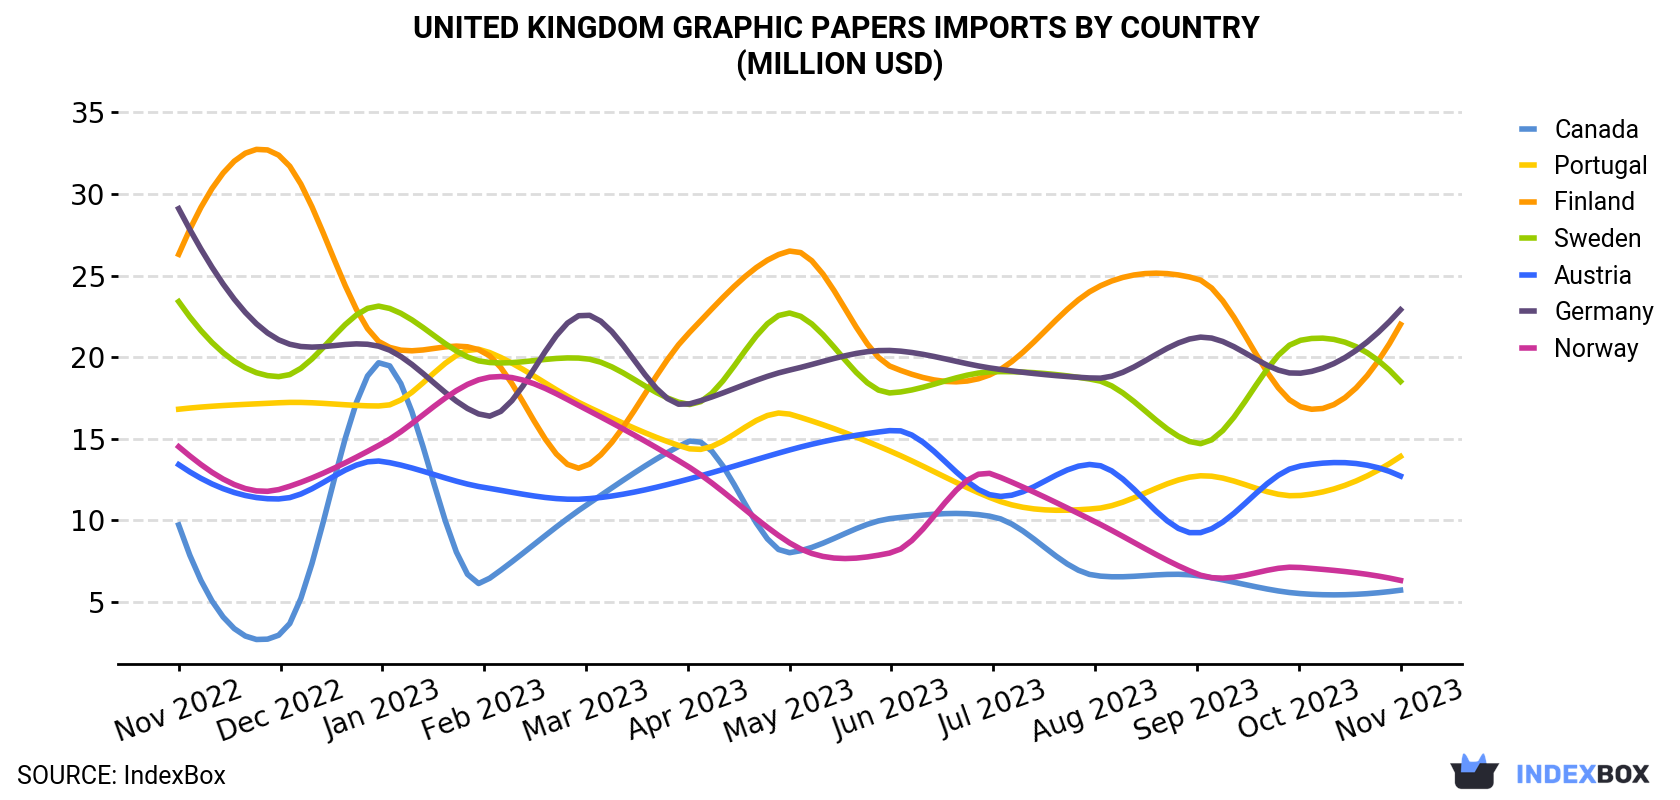 United Kingdom Graphic Papers Imports By Country (Million USD)